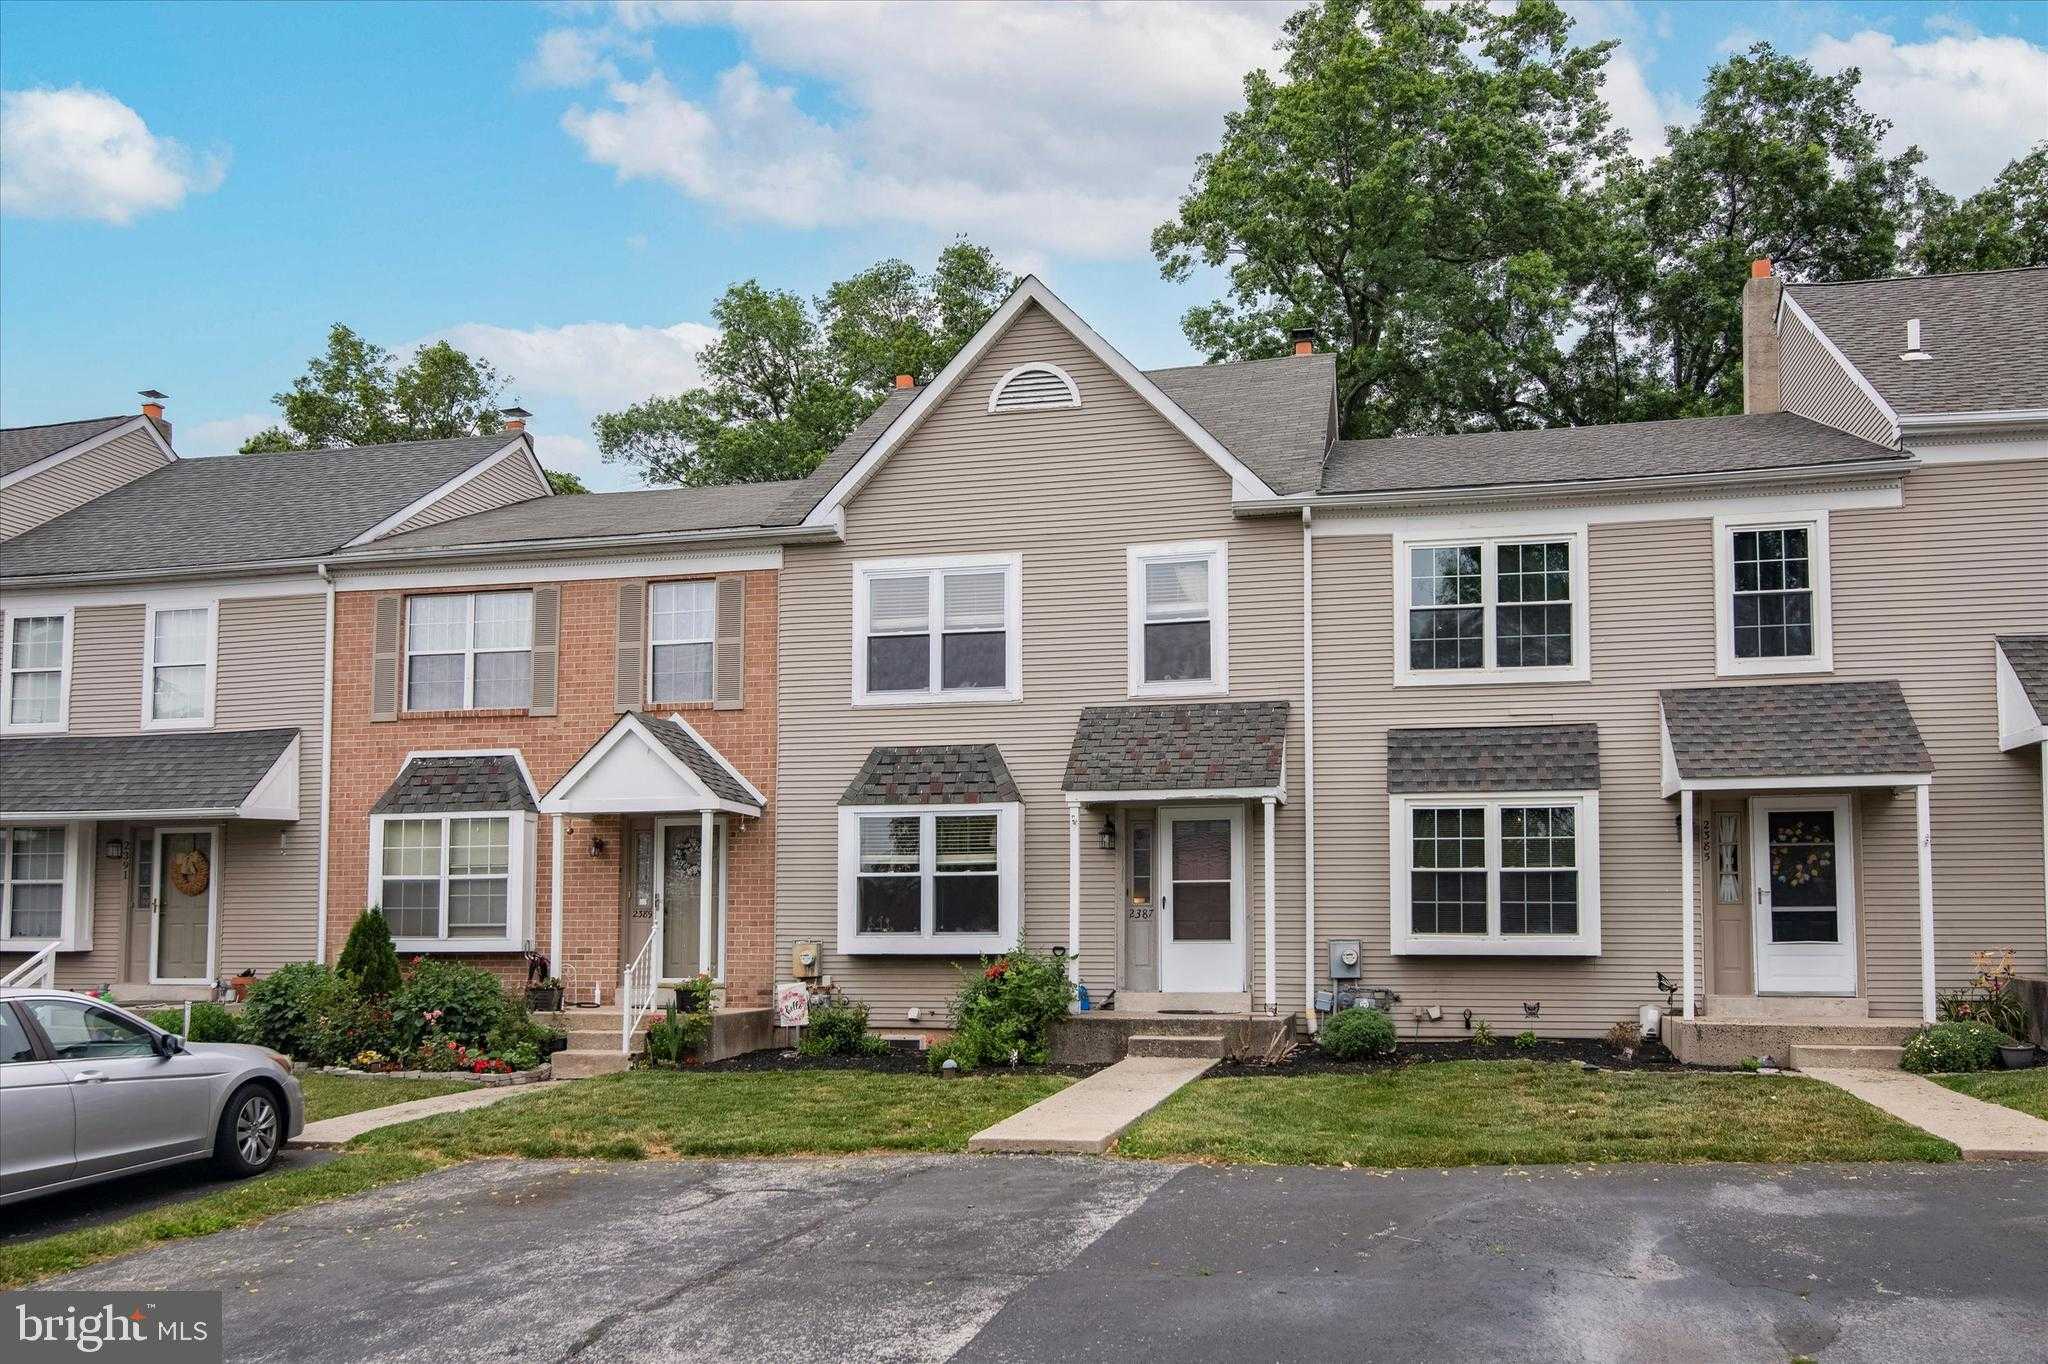 View NORRISTOWN, PA 19403 townhome